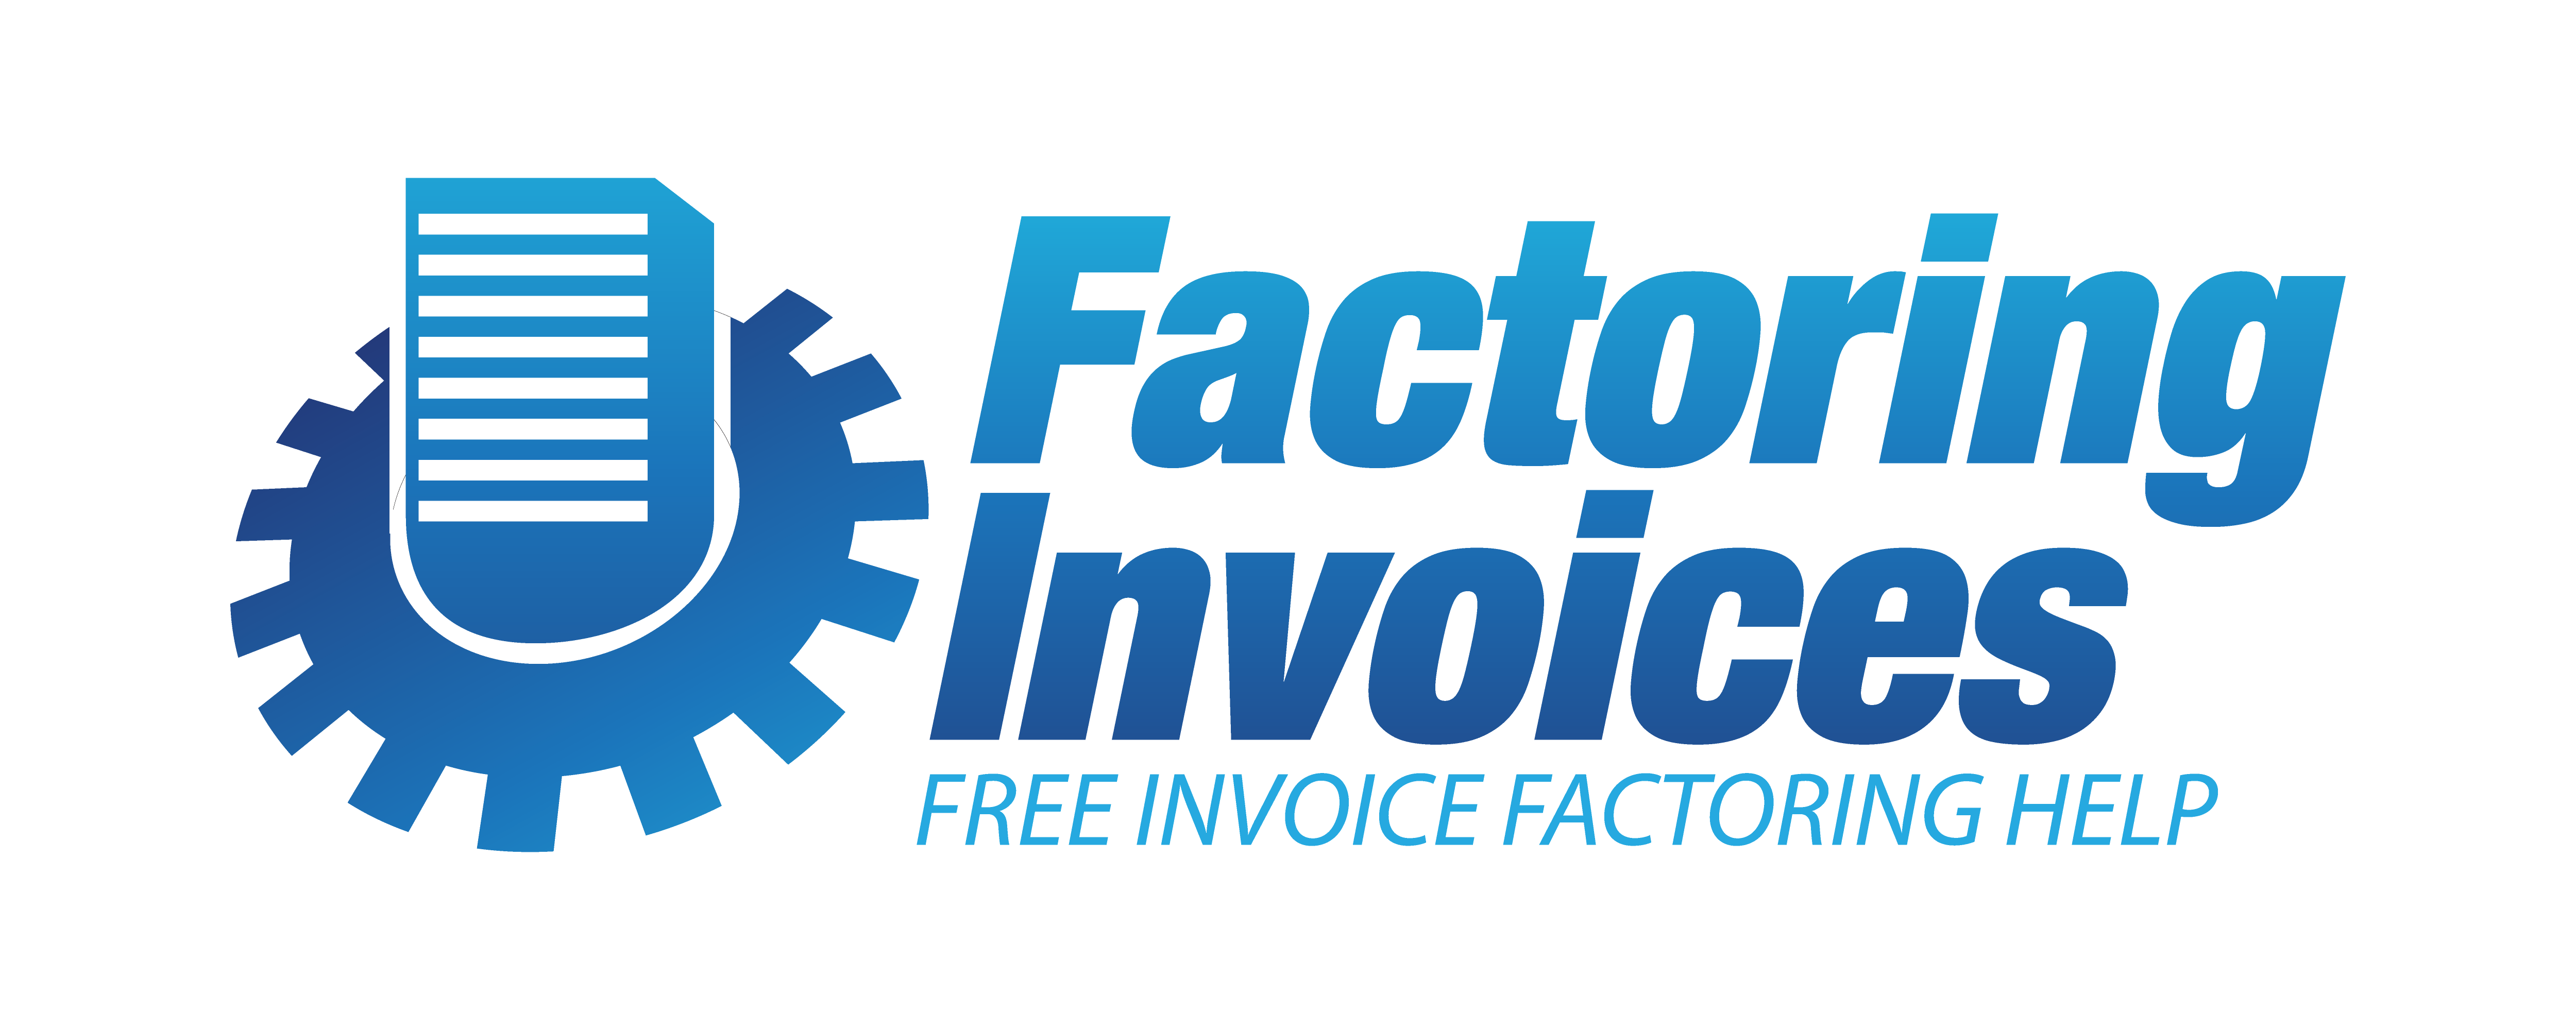 factoring invoices startups with